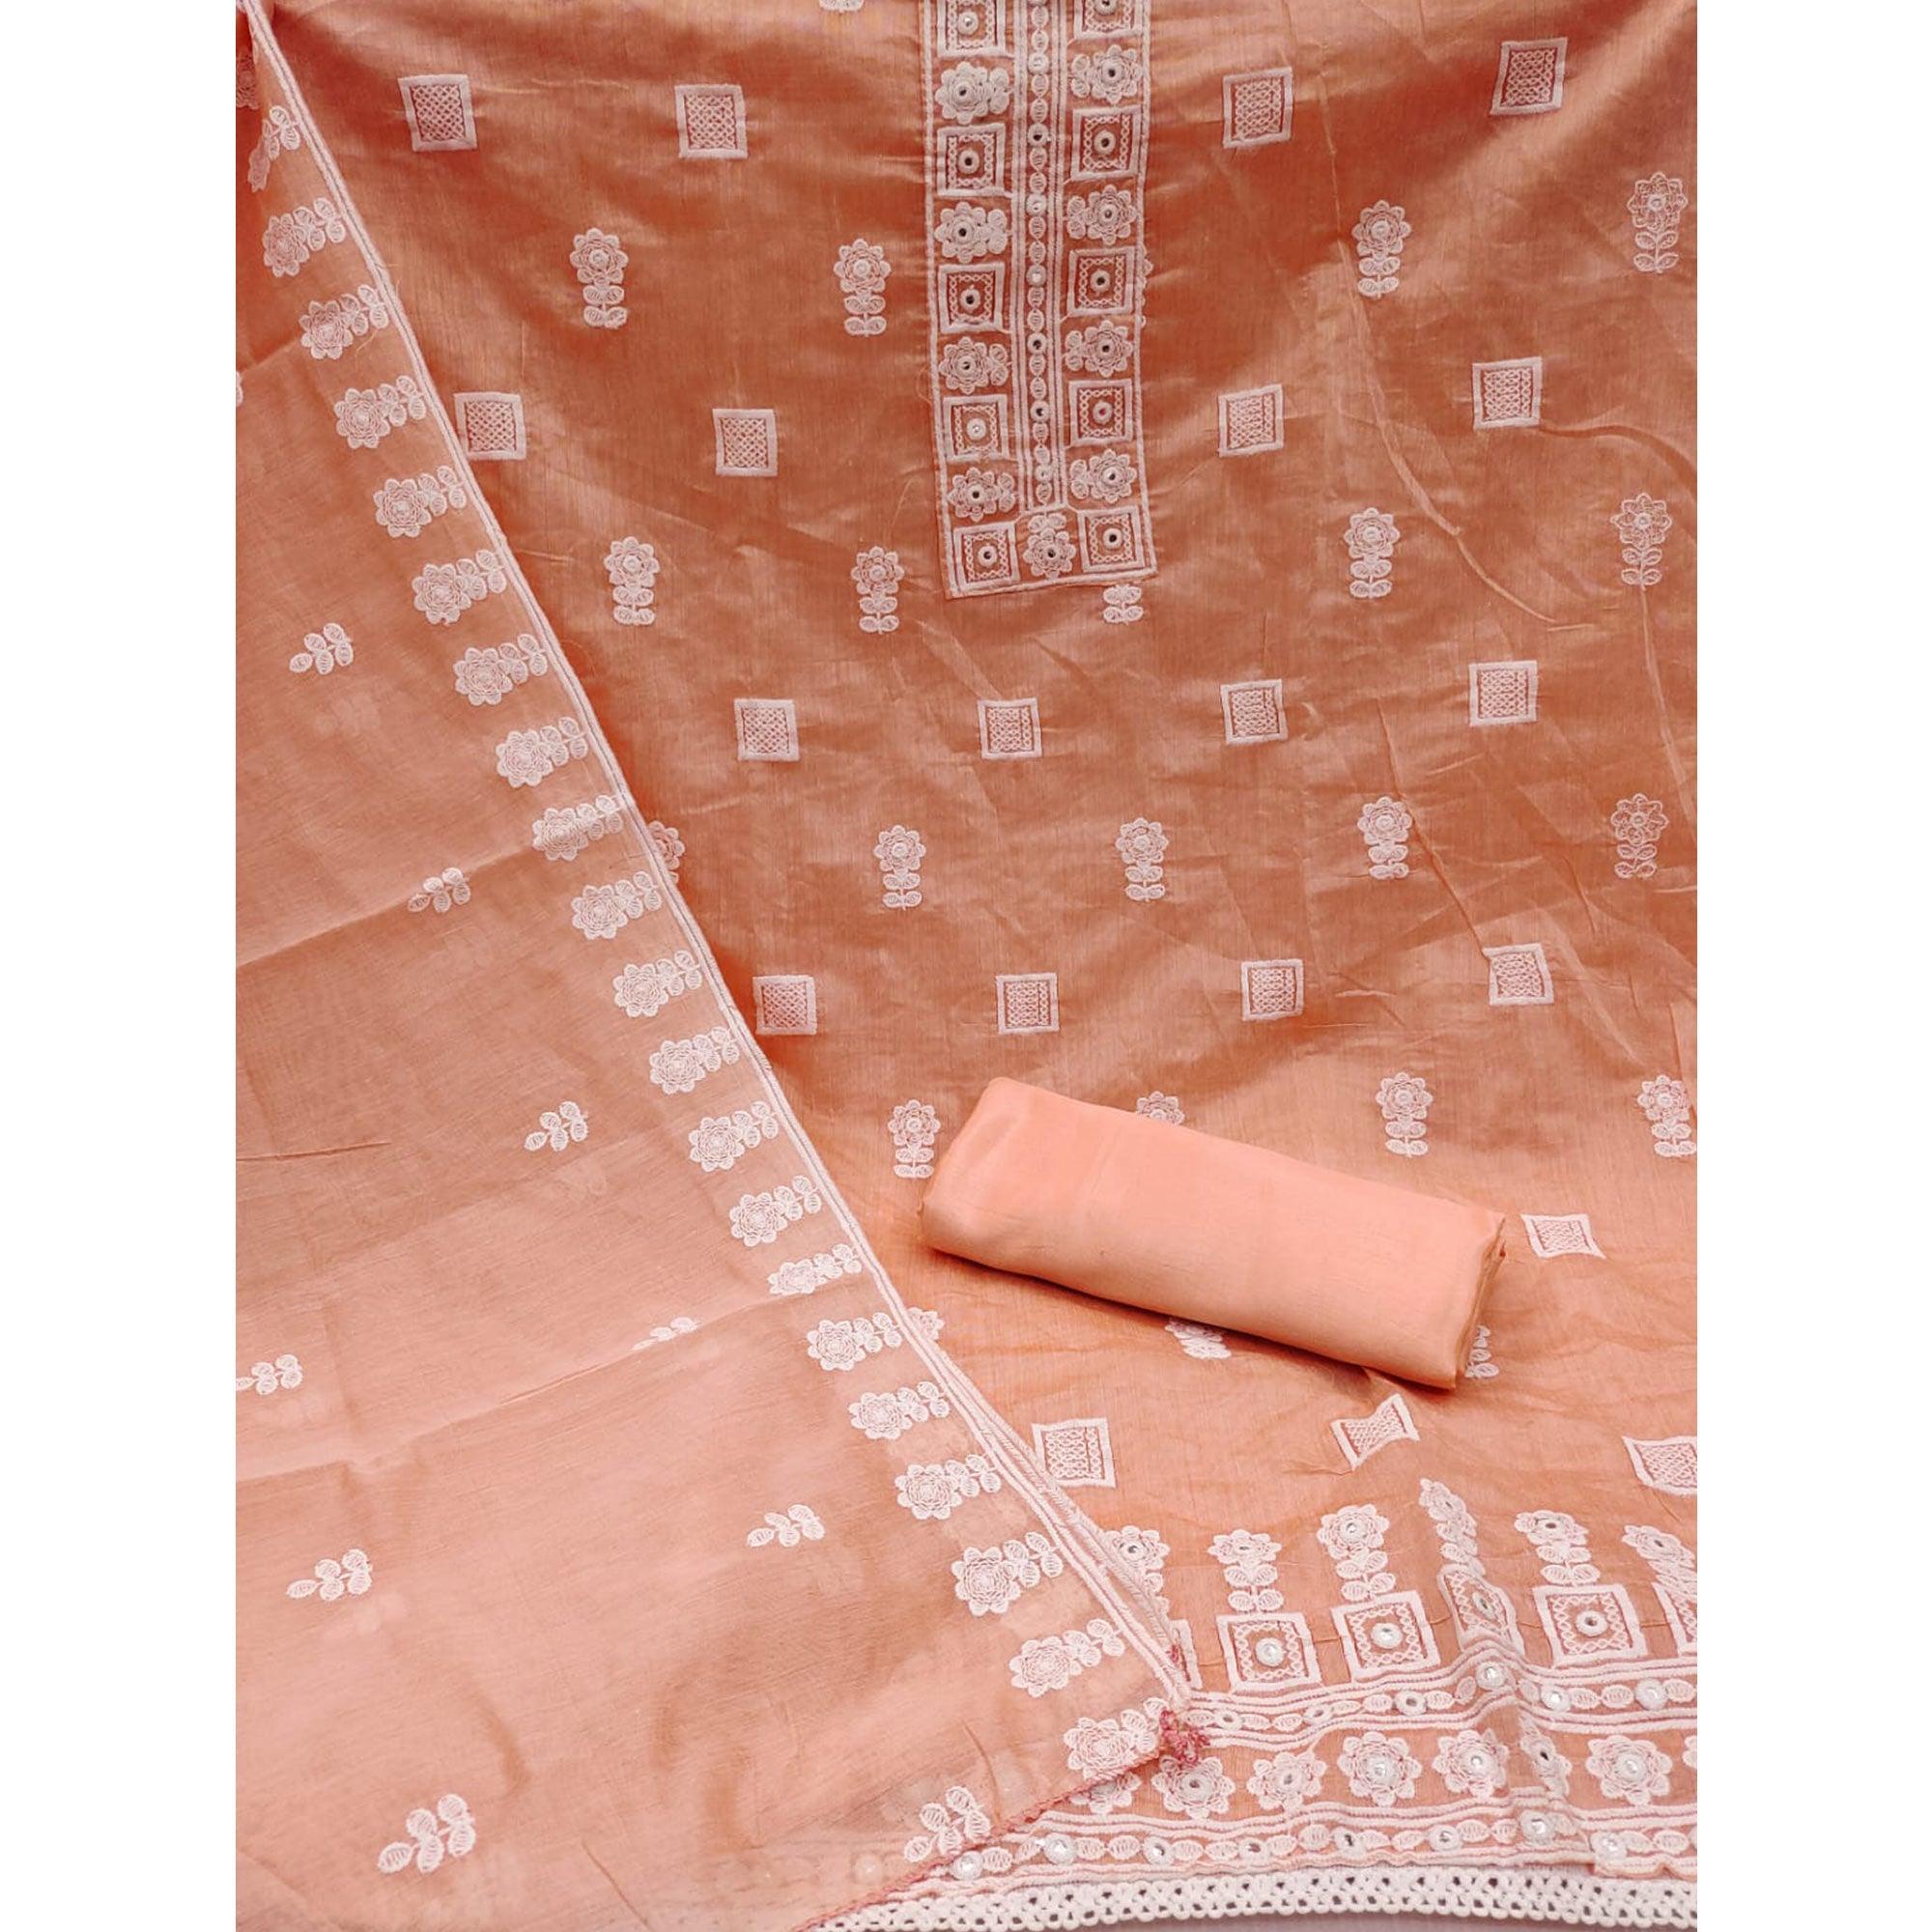 Peach Floral Embroidered Chanderi Dress Material - Peachmode